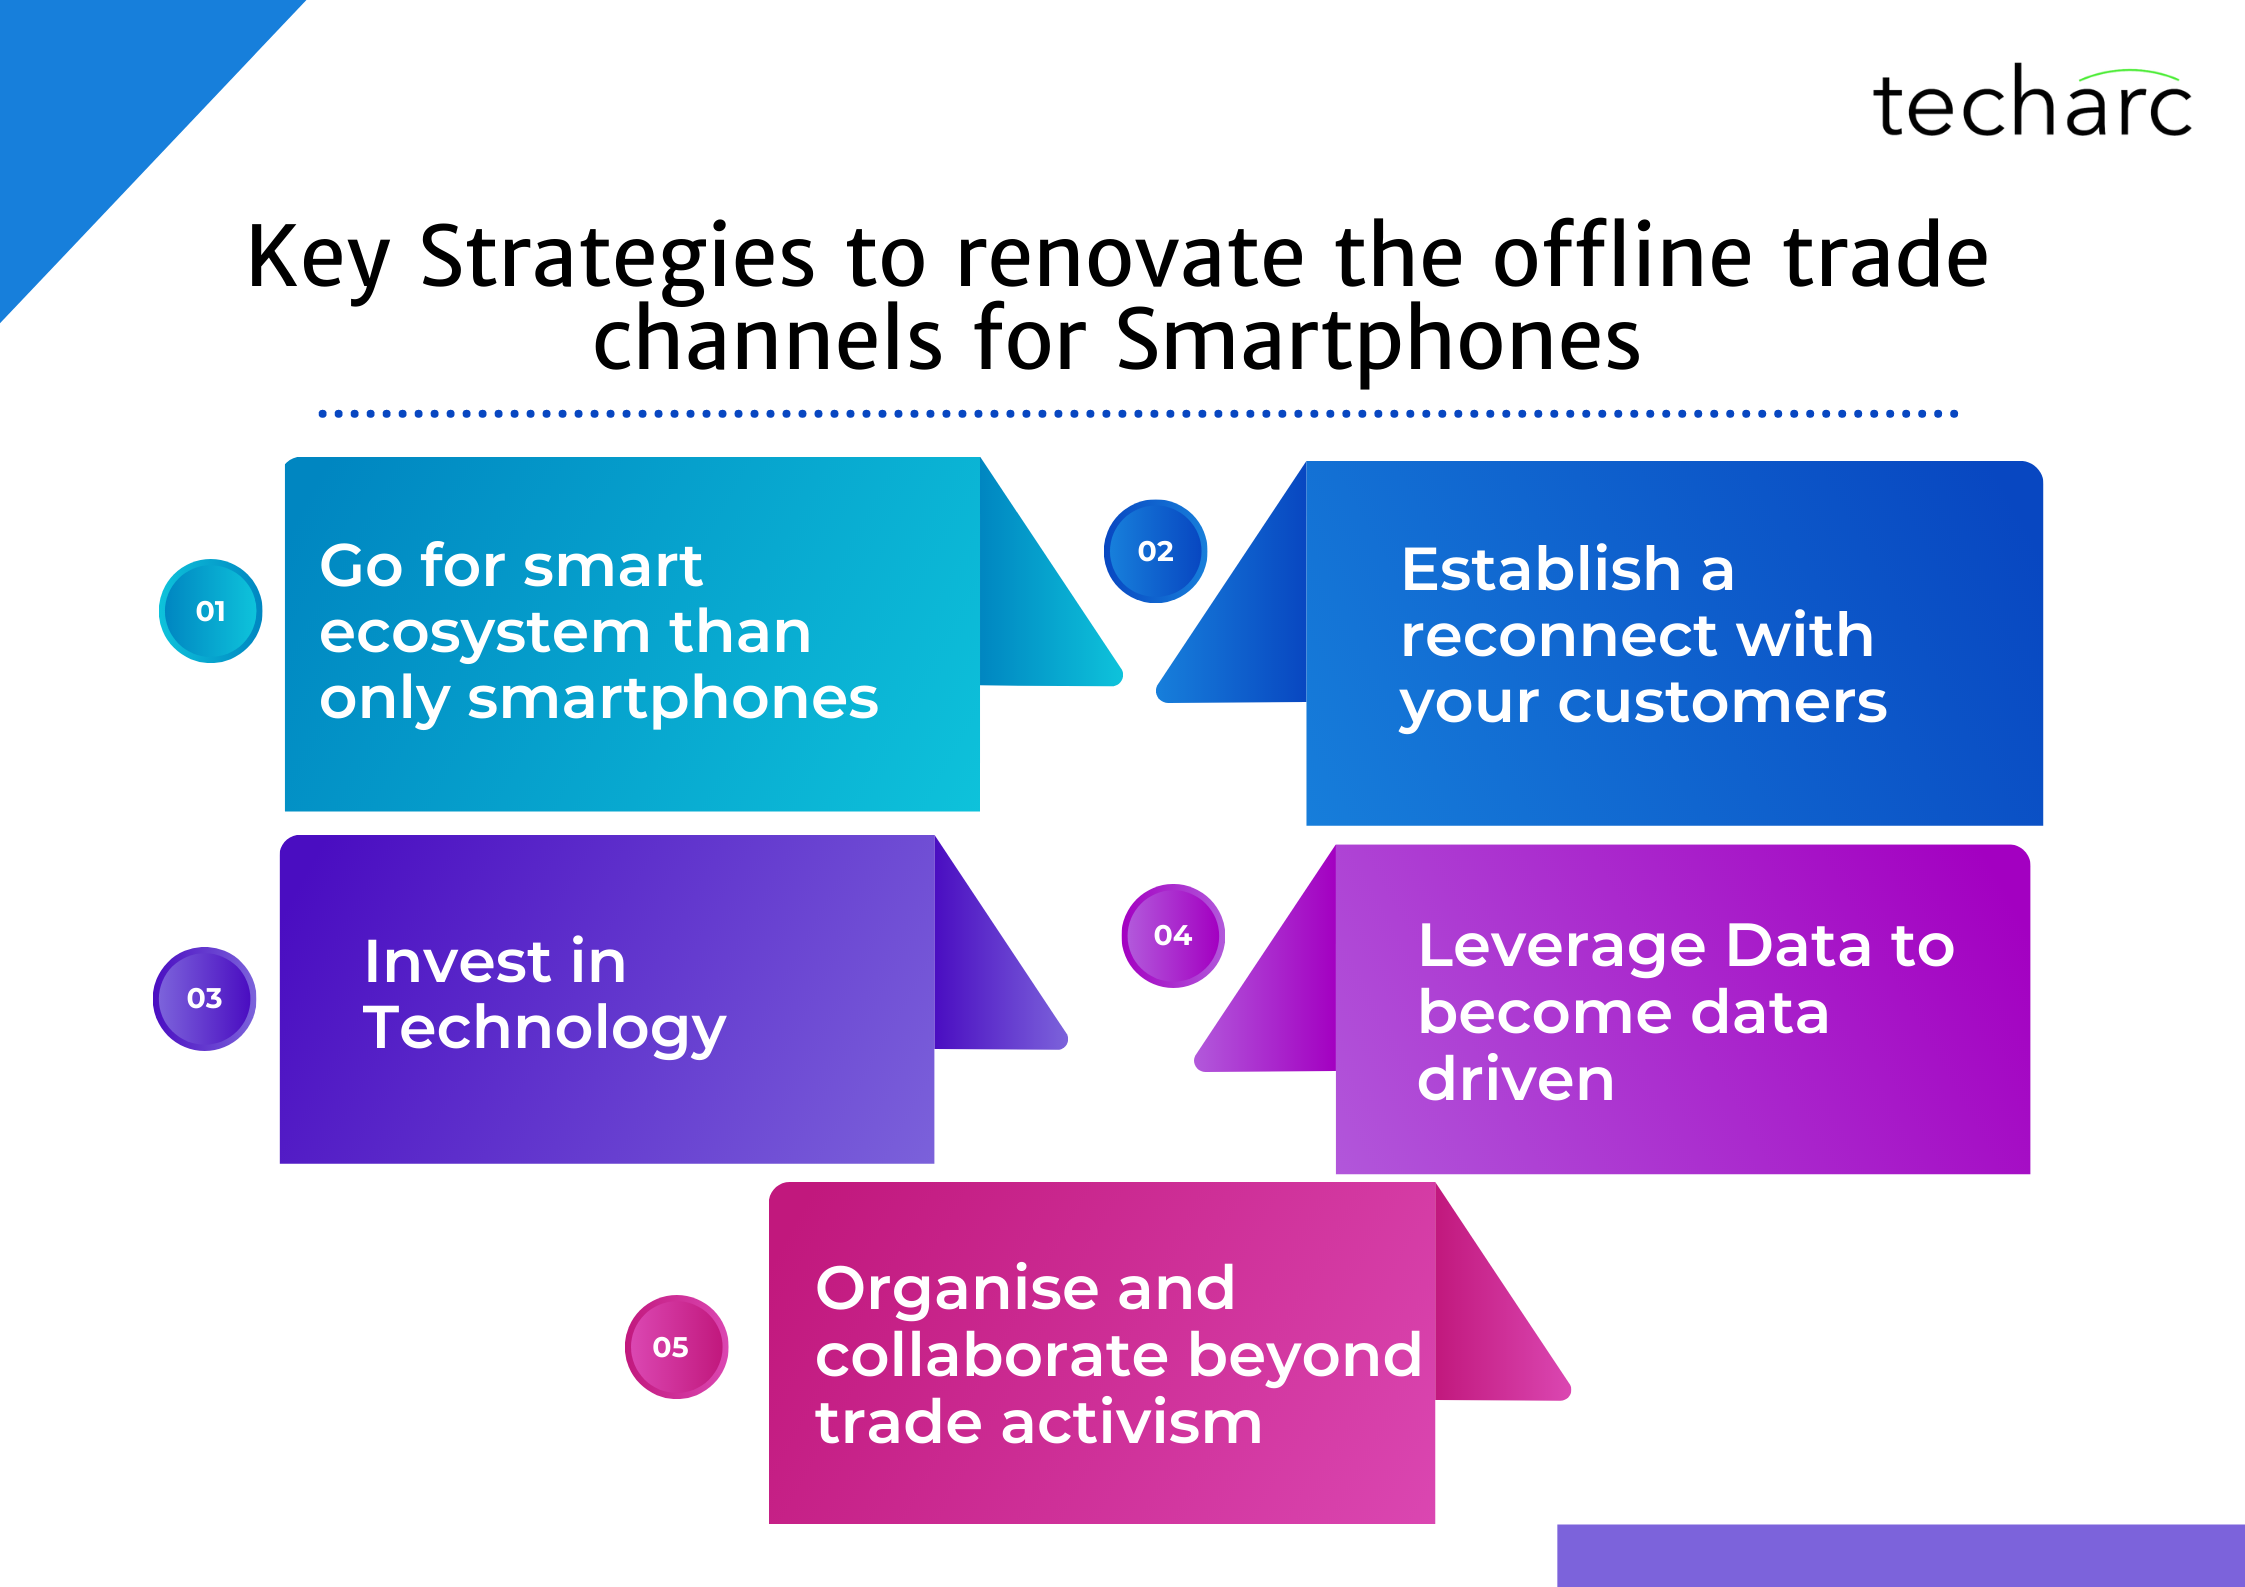 Amid rising online channel shares for smartphones, the offline trade channel needs to renovate to stay afloat.